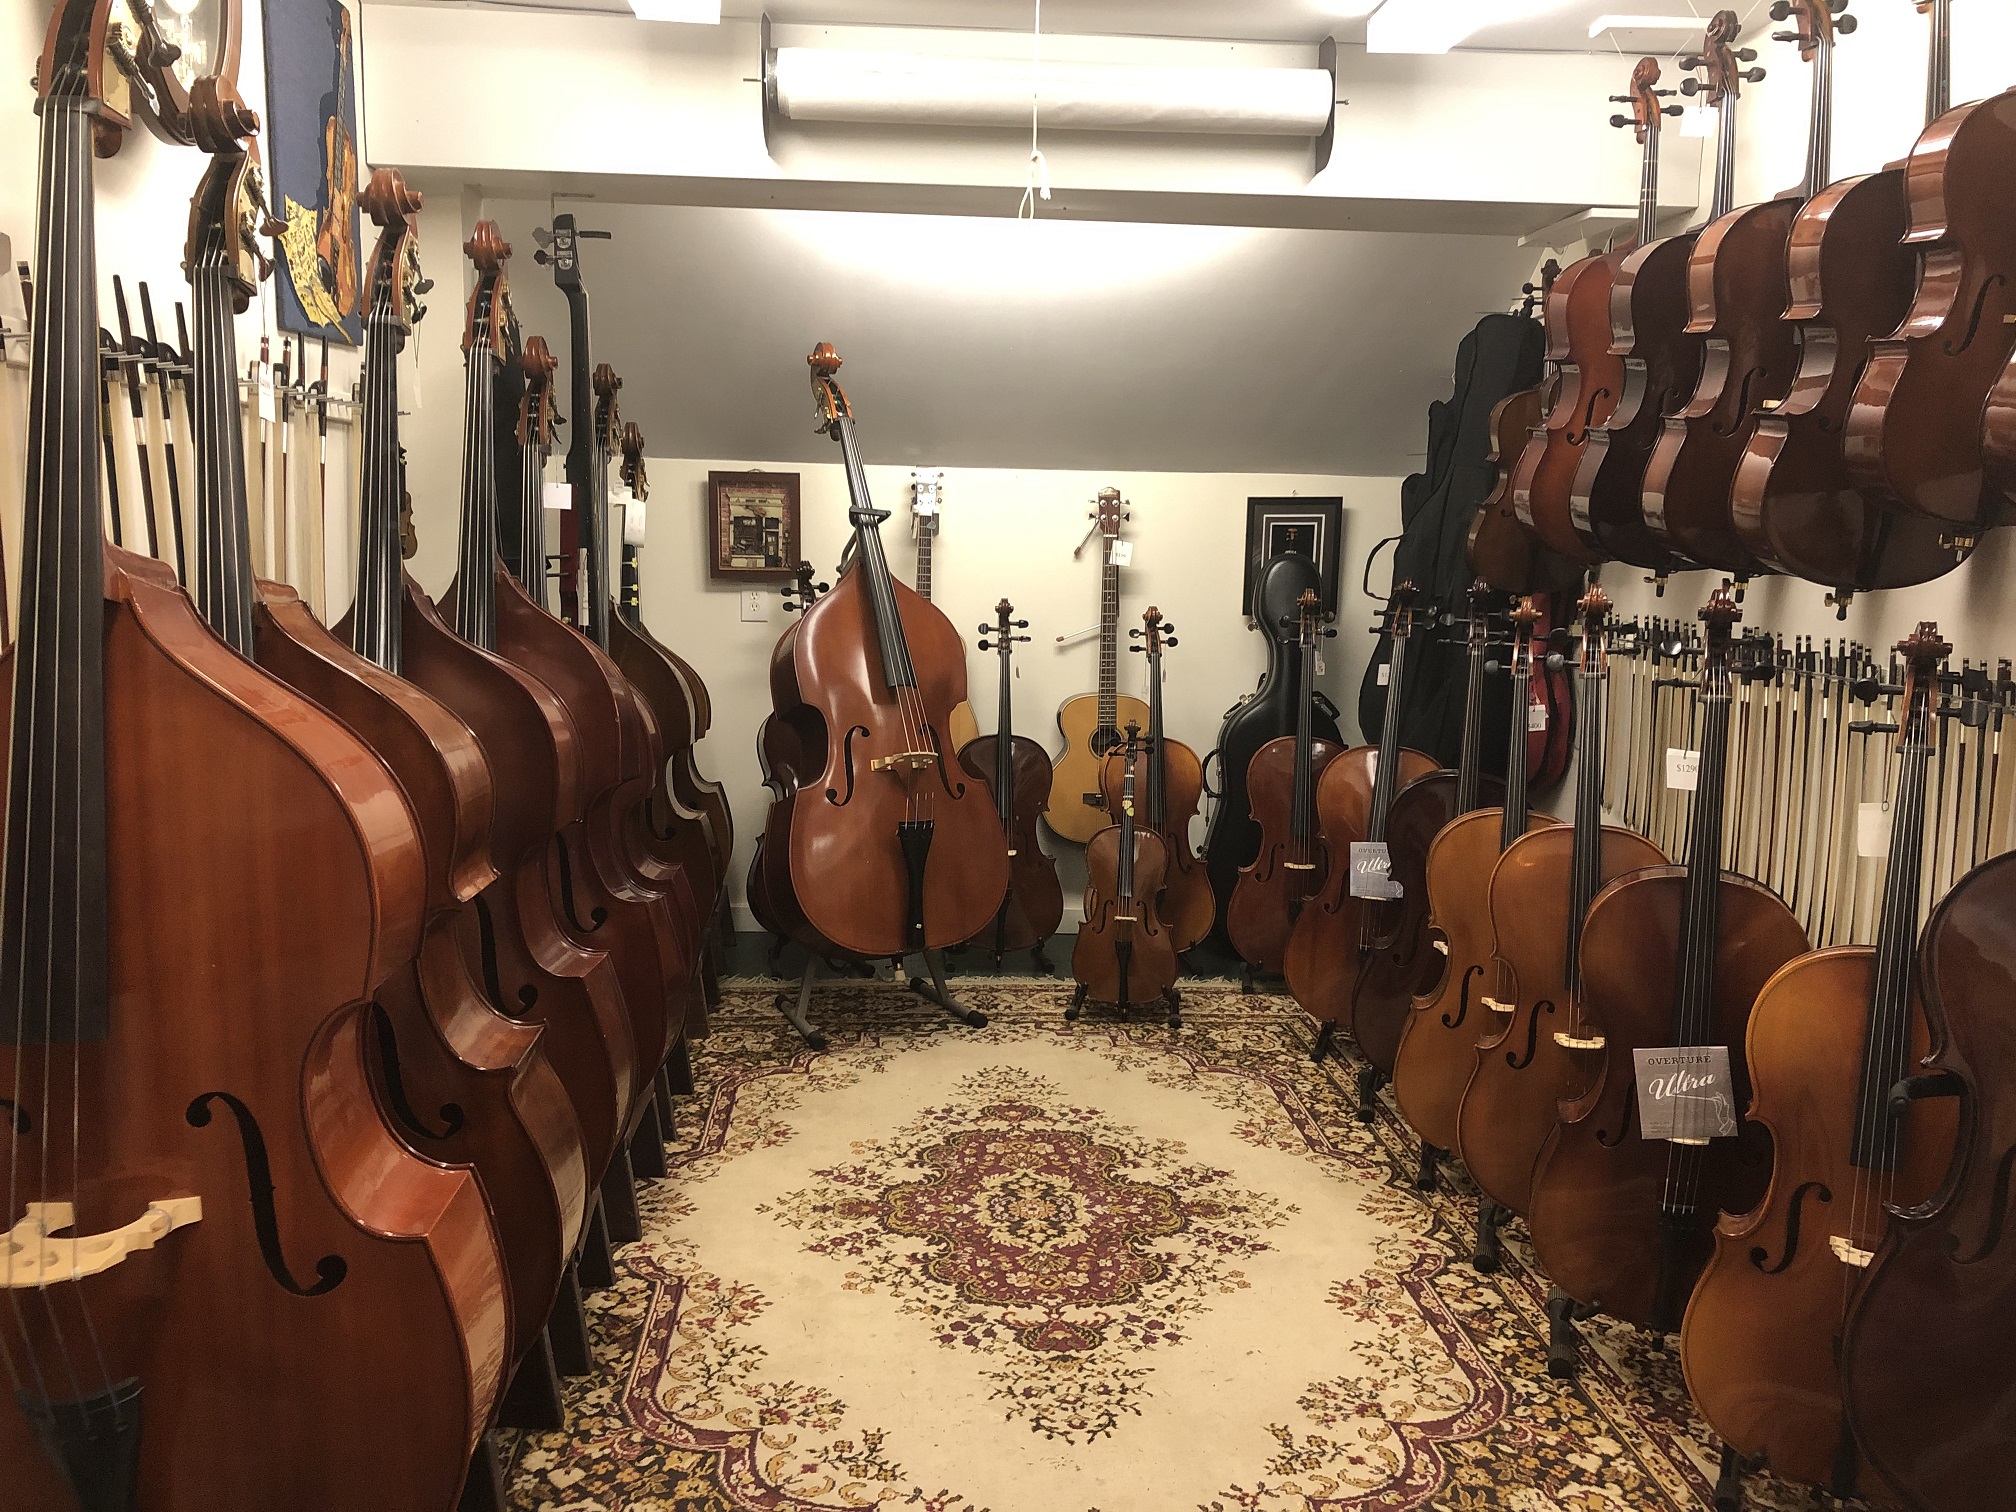 Basses and cellos on display